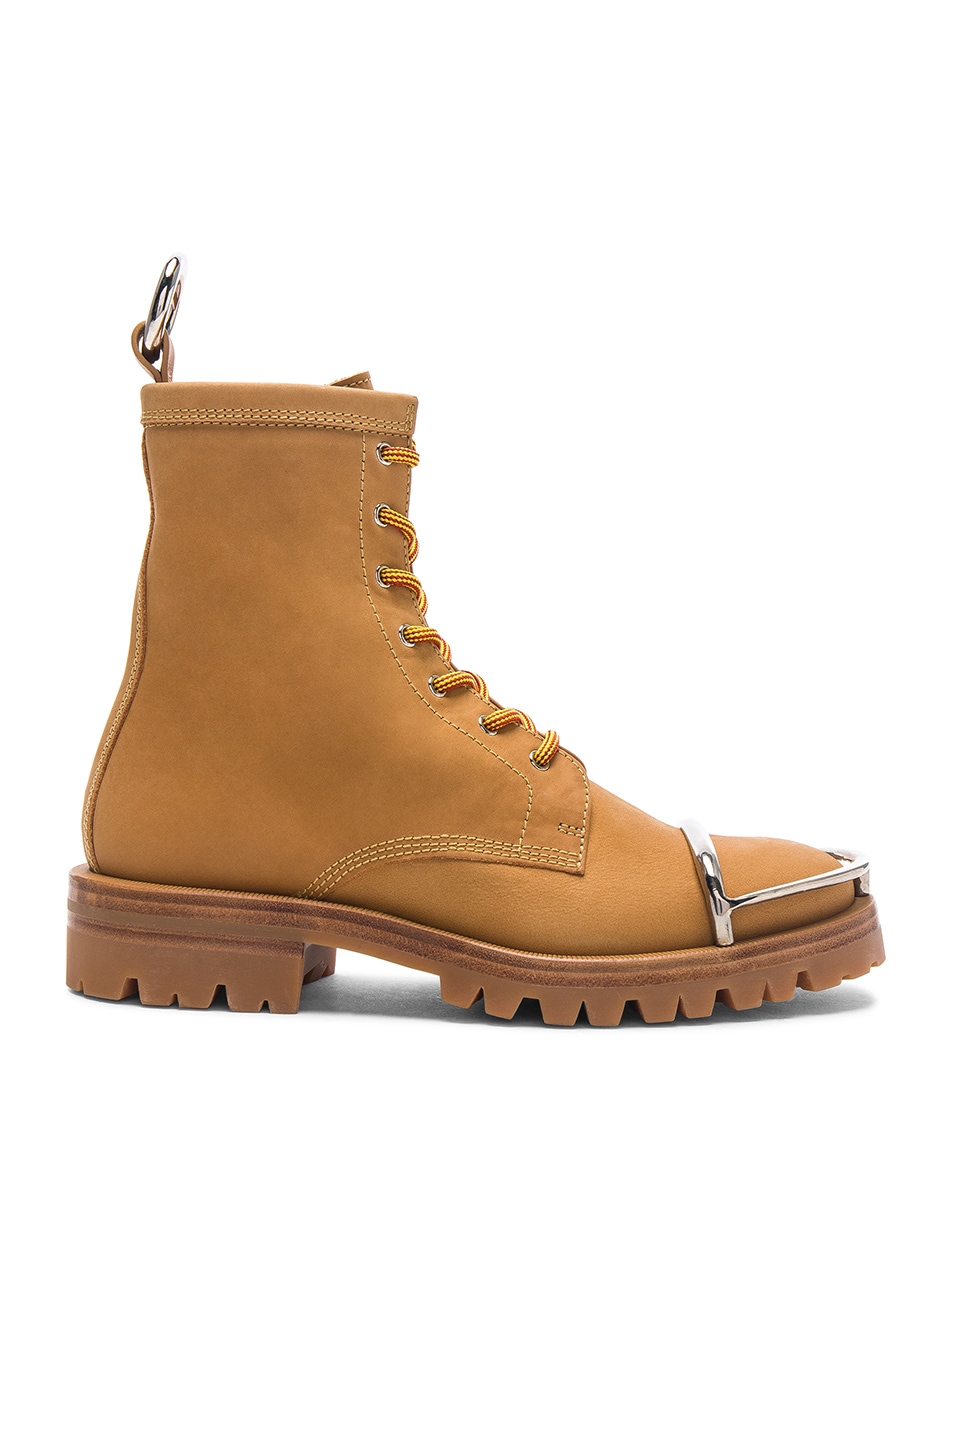 Image 1 of Alexander Wang Nubuck Leather Lyndon Boots in Wheat